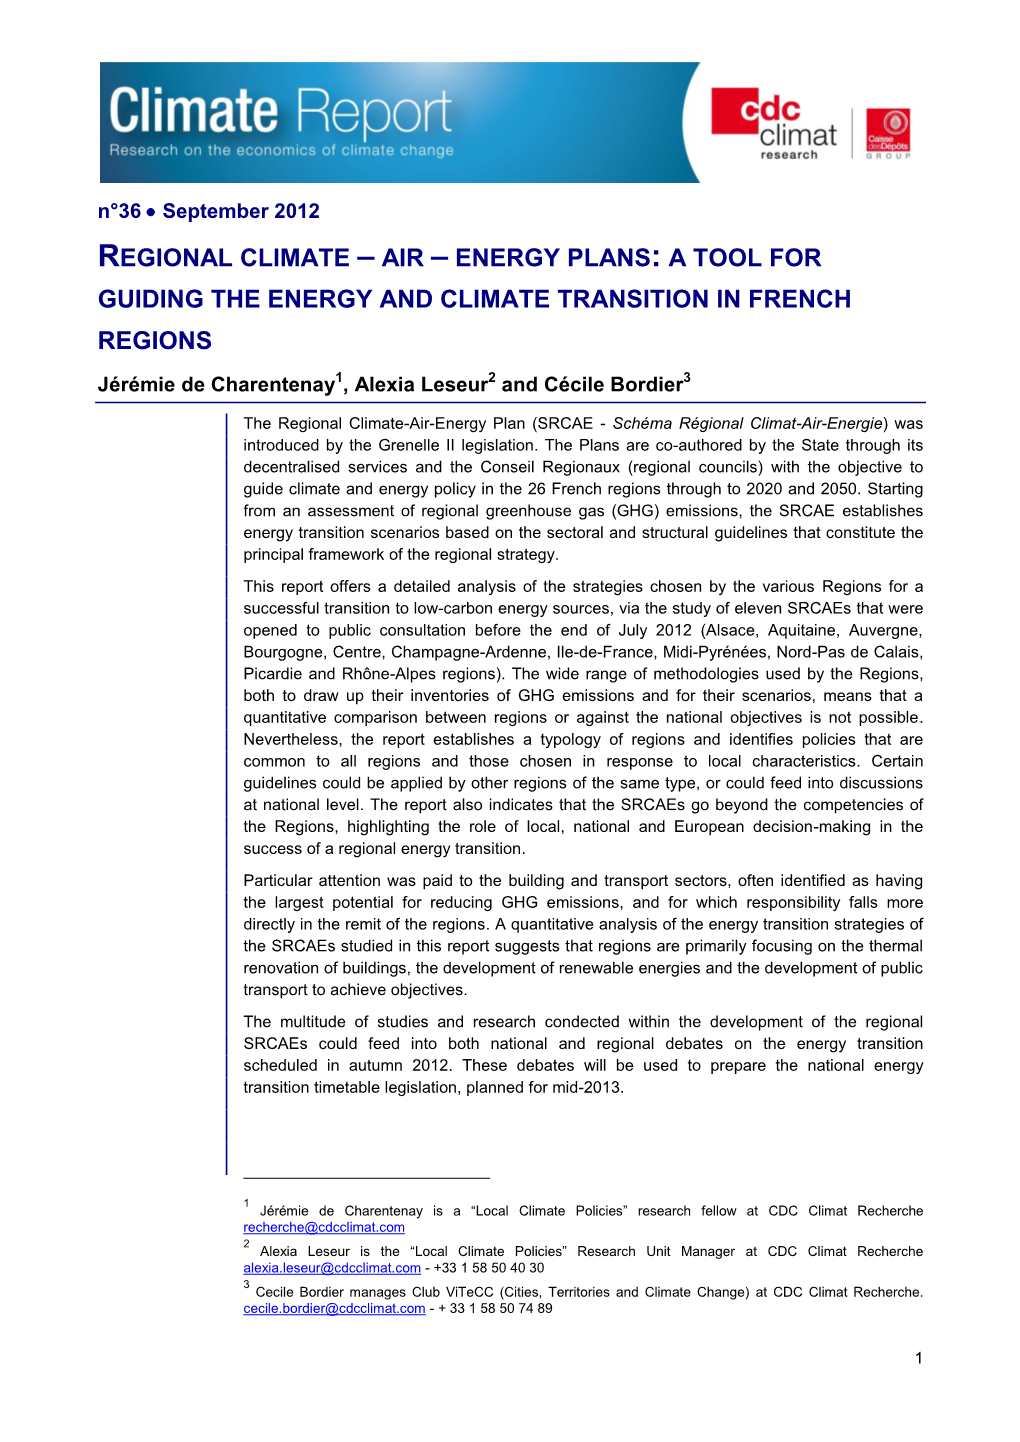 A TOOL for GUIDING the ENERGY and CLIMATE TRANSITION in FRENCH REGIONS Jérémie De Charentenay1, Alexia Leseur2 and Cécile Bordier3